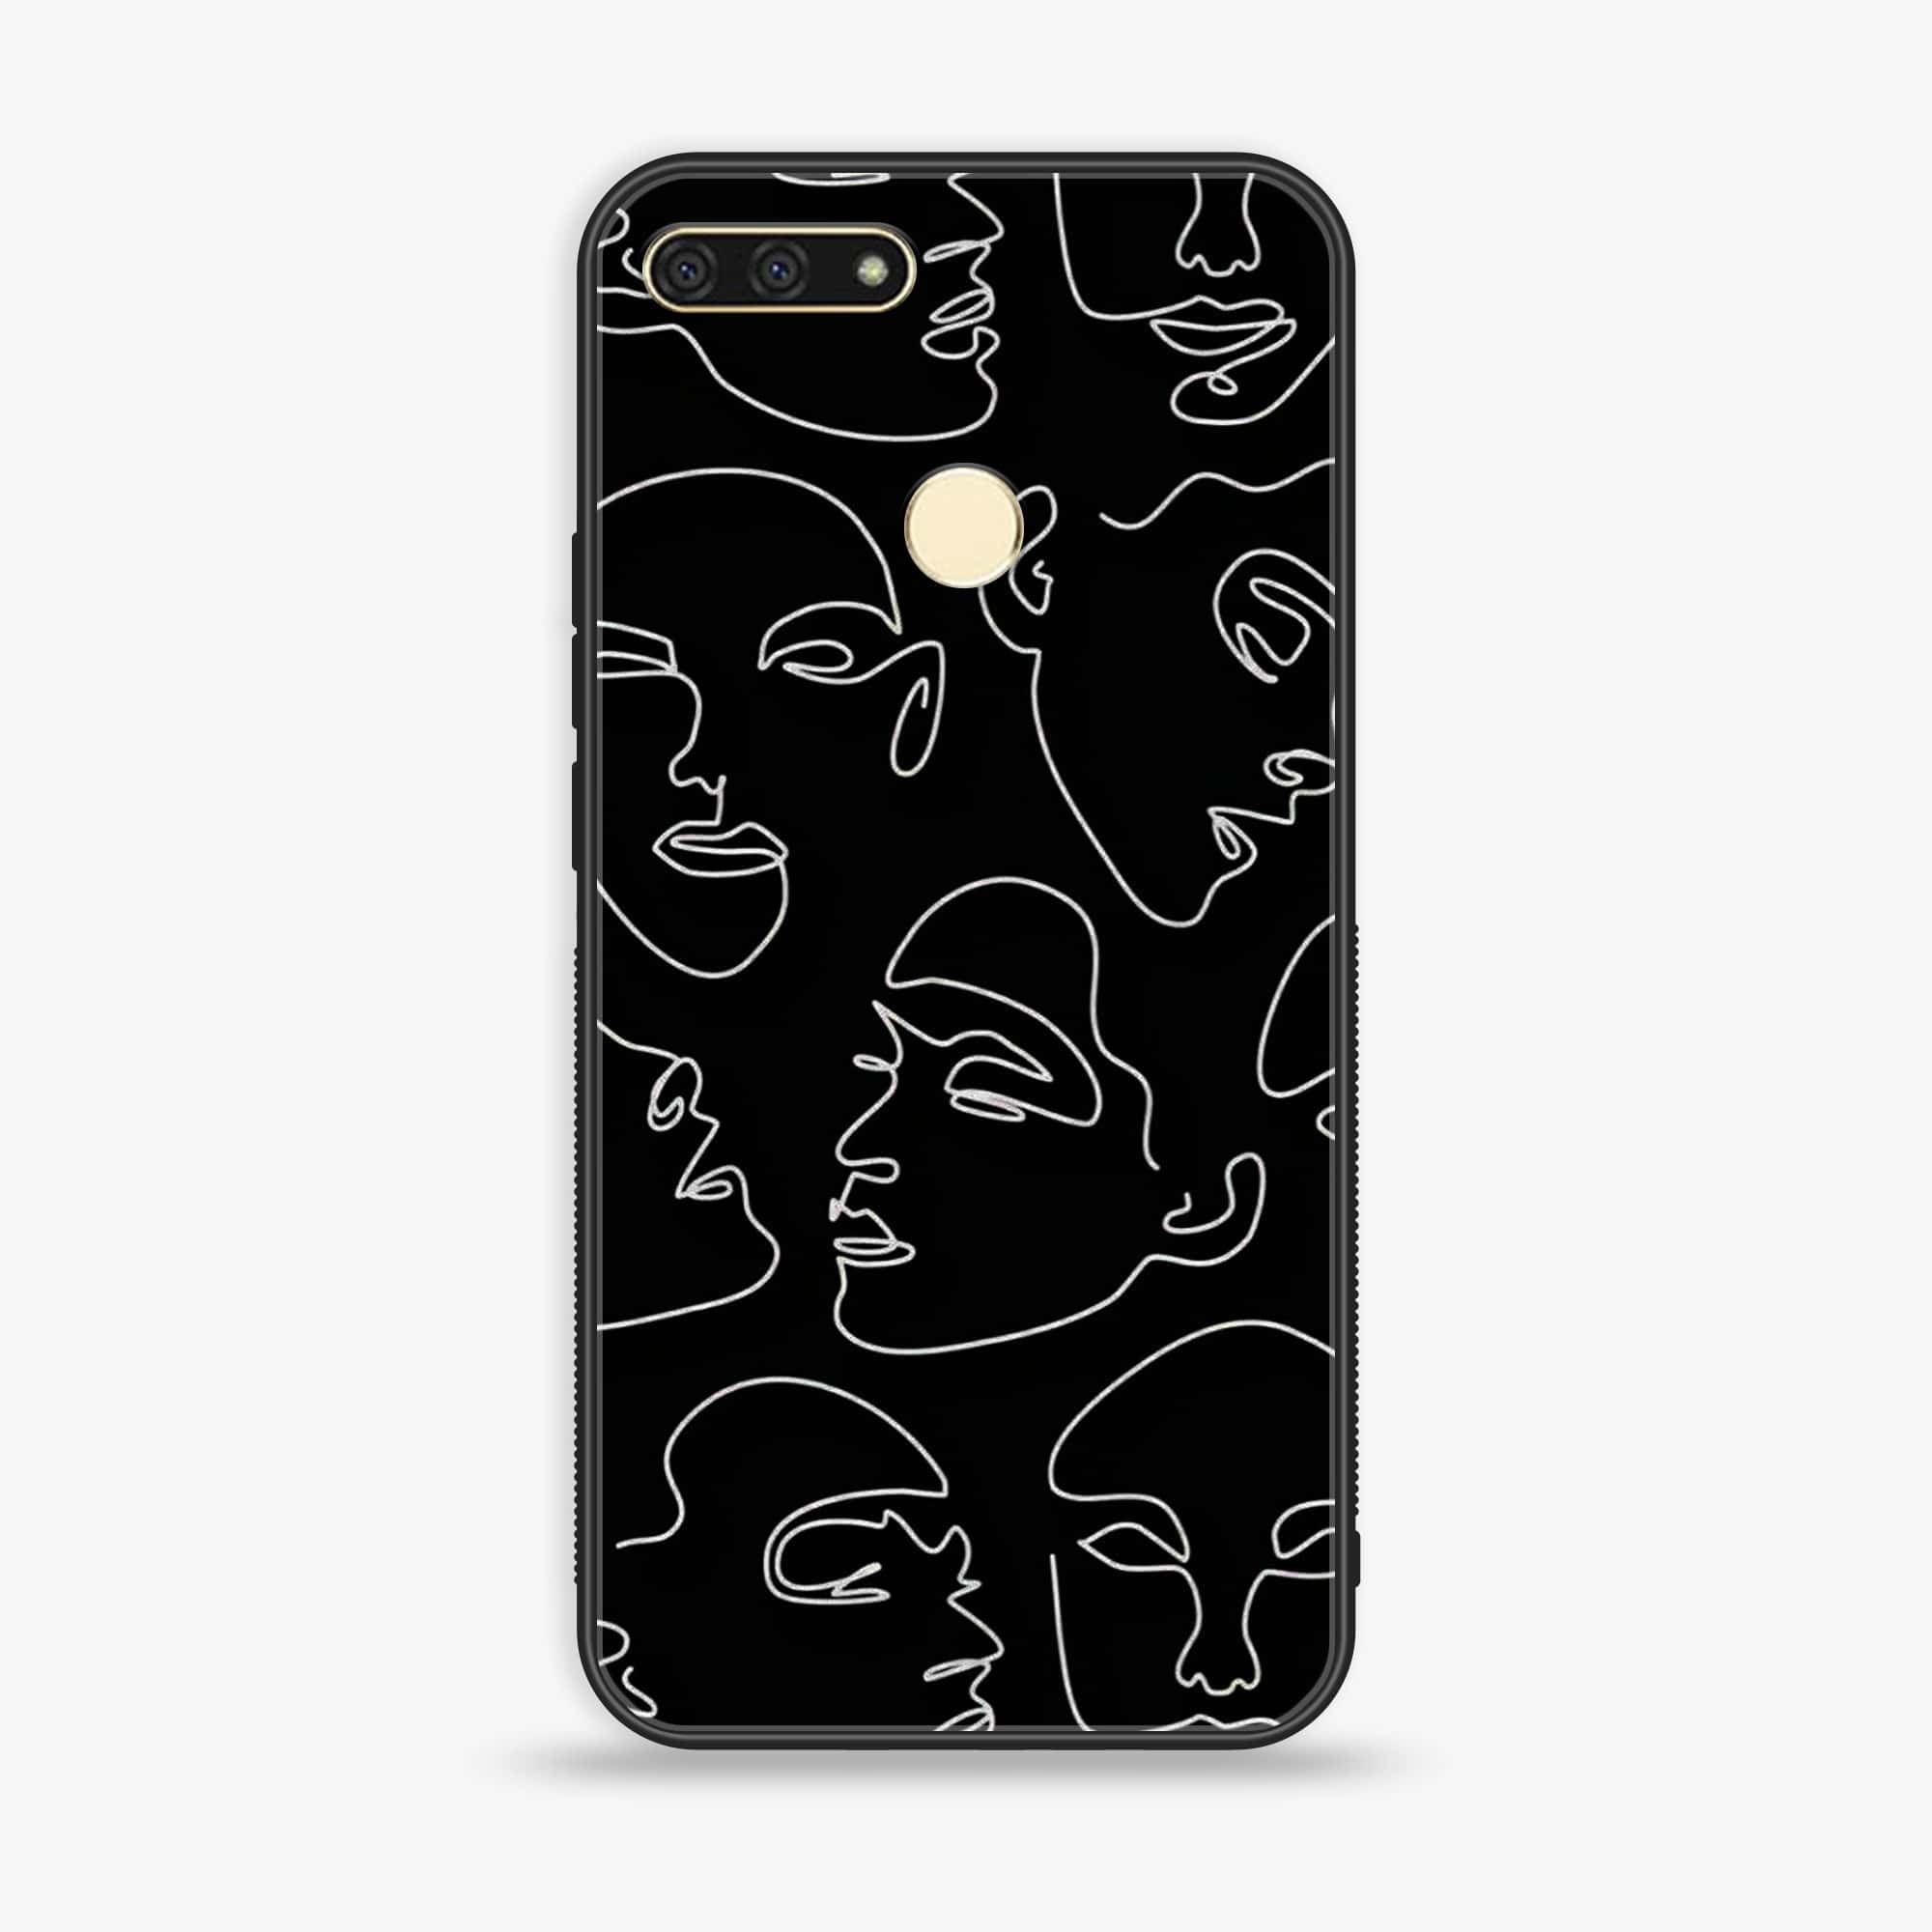 Huawei Y6 2018/Honor Play 7A - Girls Line Art Series  - Premium Printed Glass soft Bumper shock Proof Case